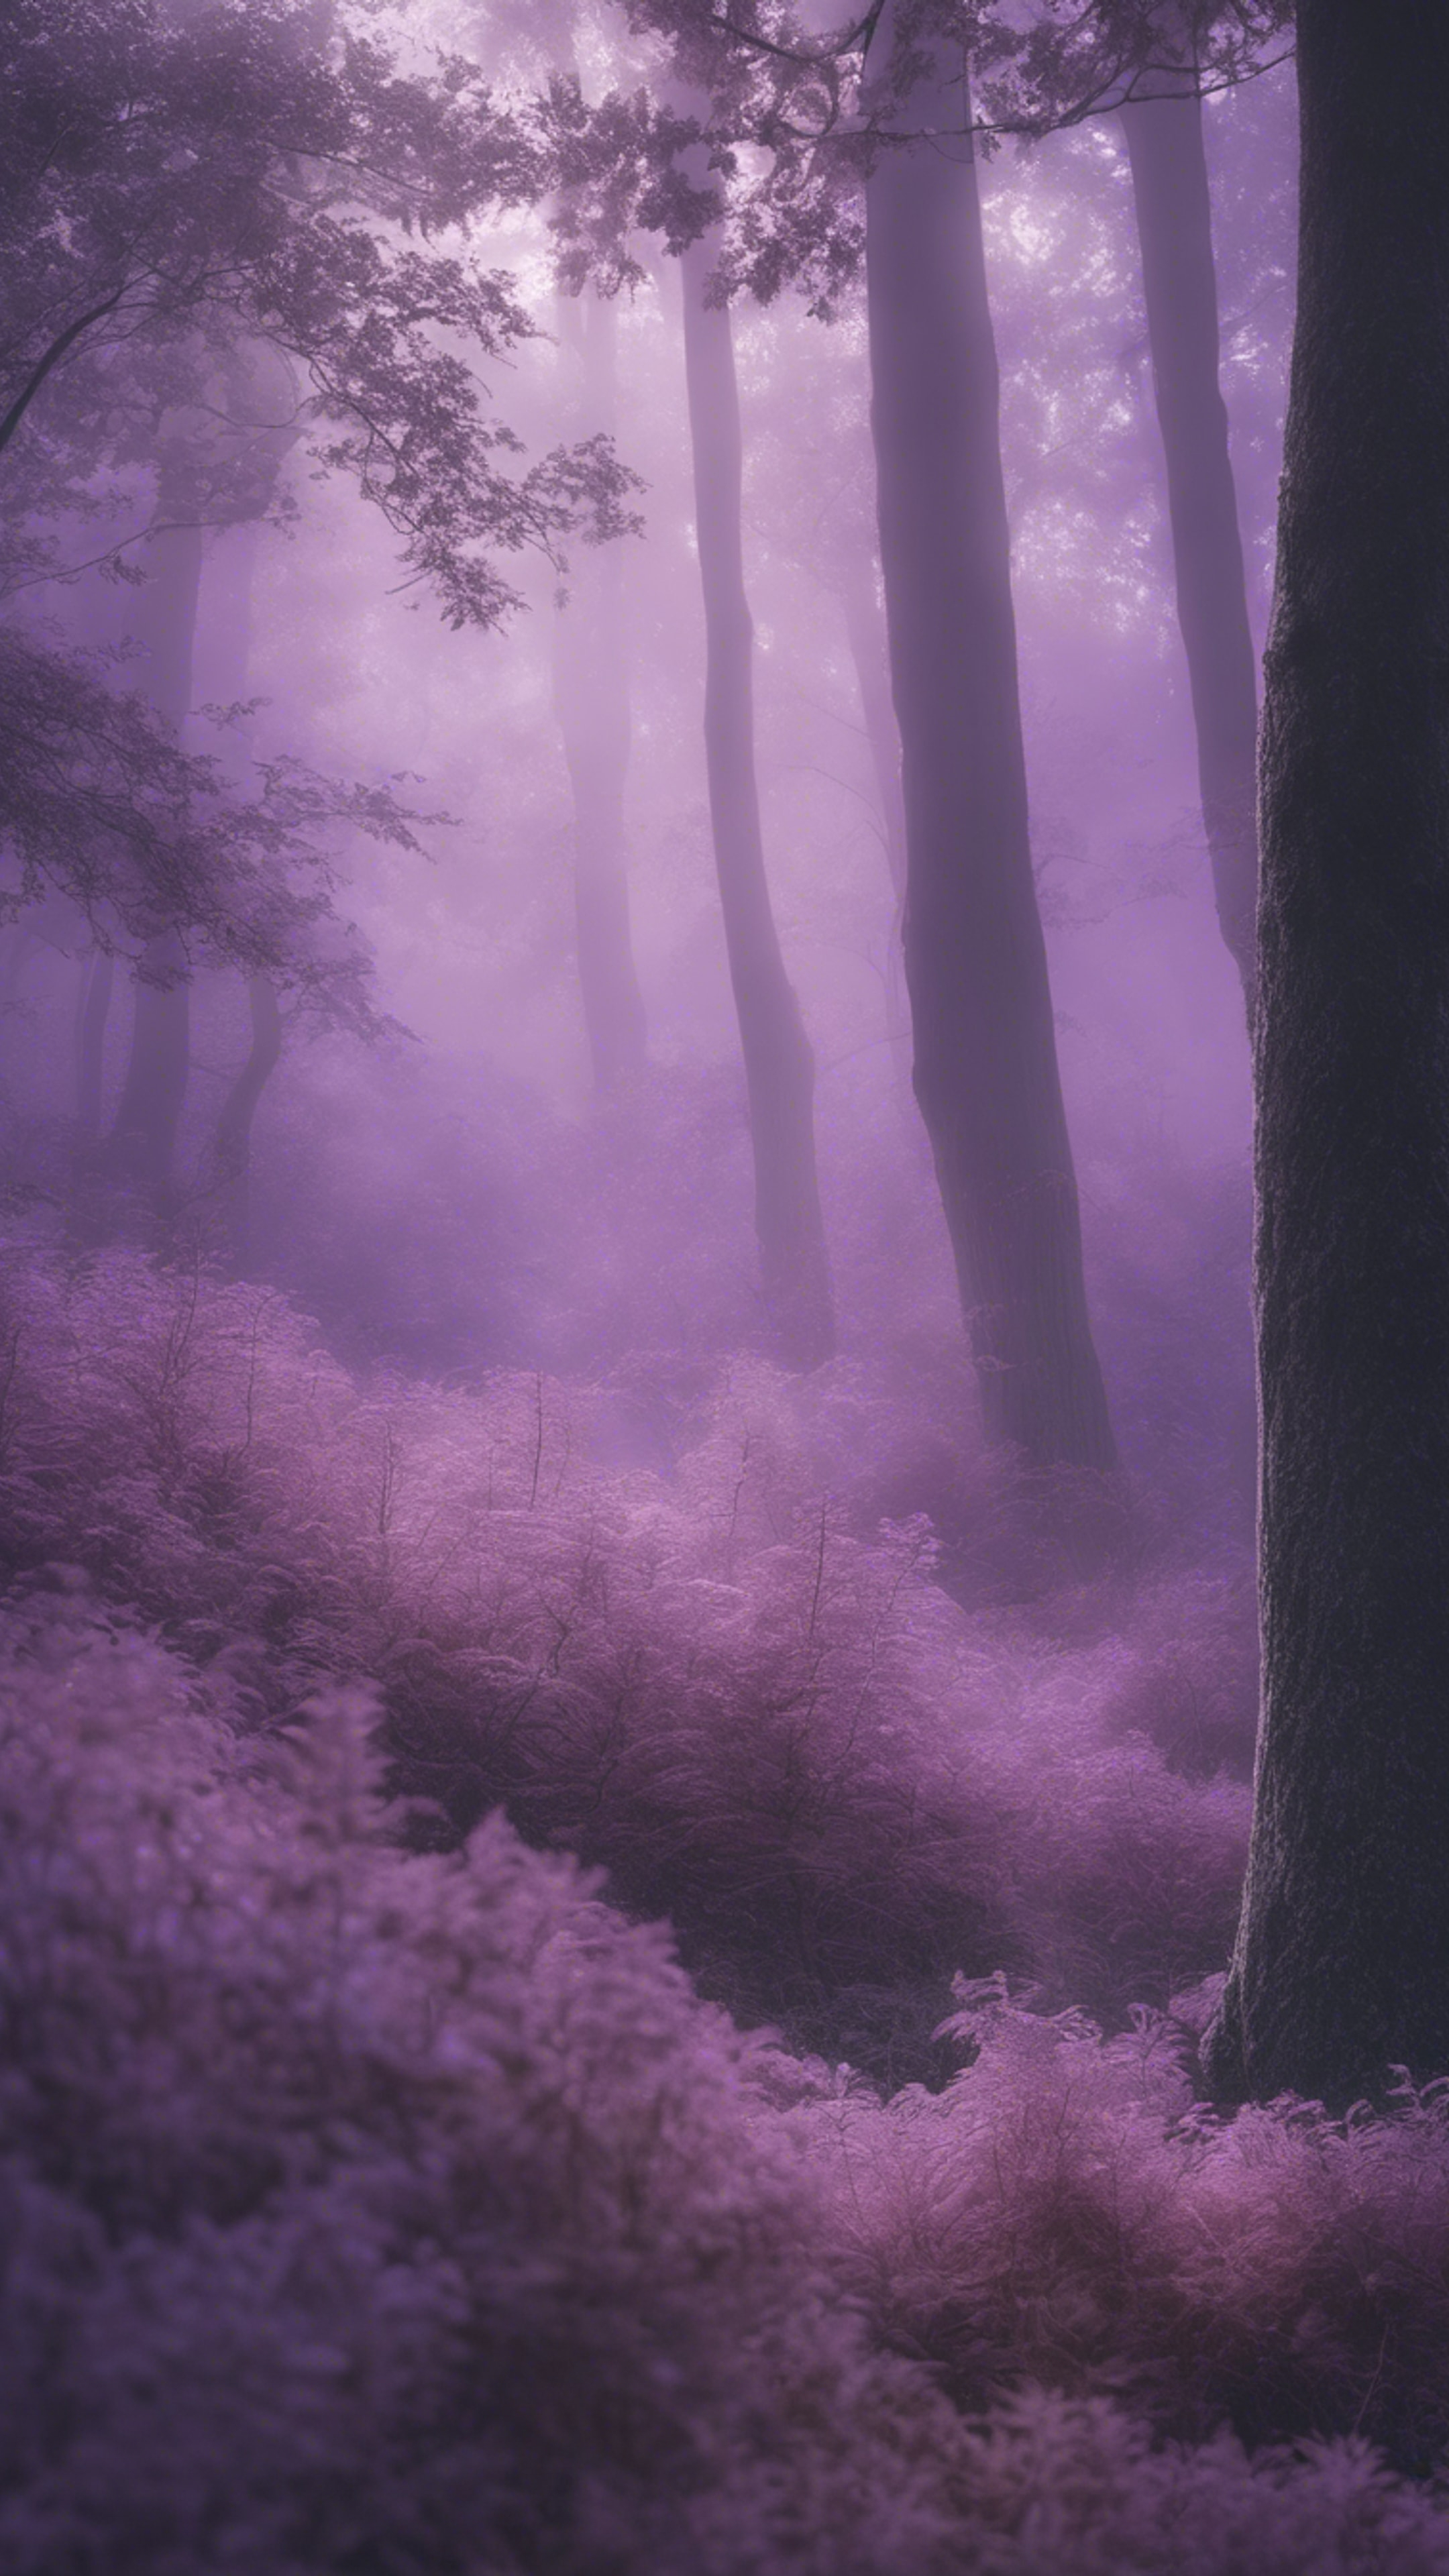 Ethereal scene of a tranquil forest bowed under a silky layer of light purple fog. Hintergrund[581b7126aa2a4d368dd8]